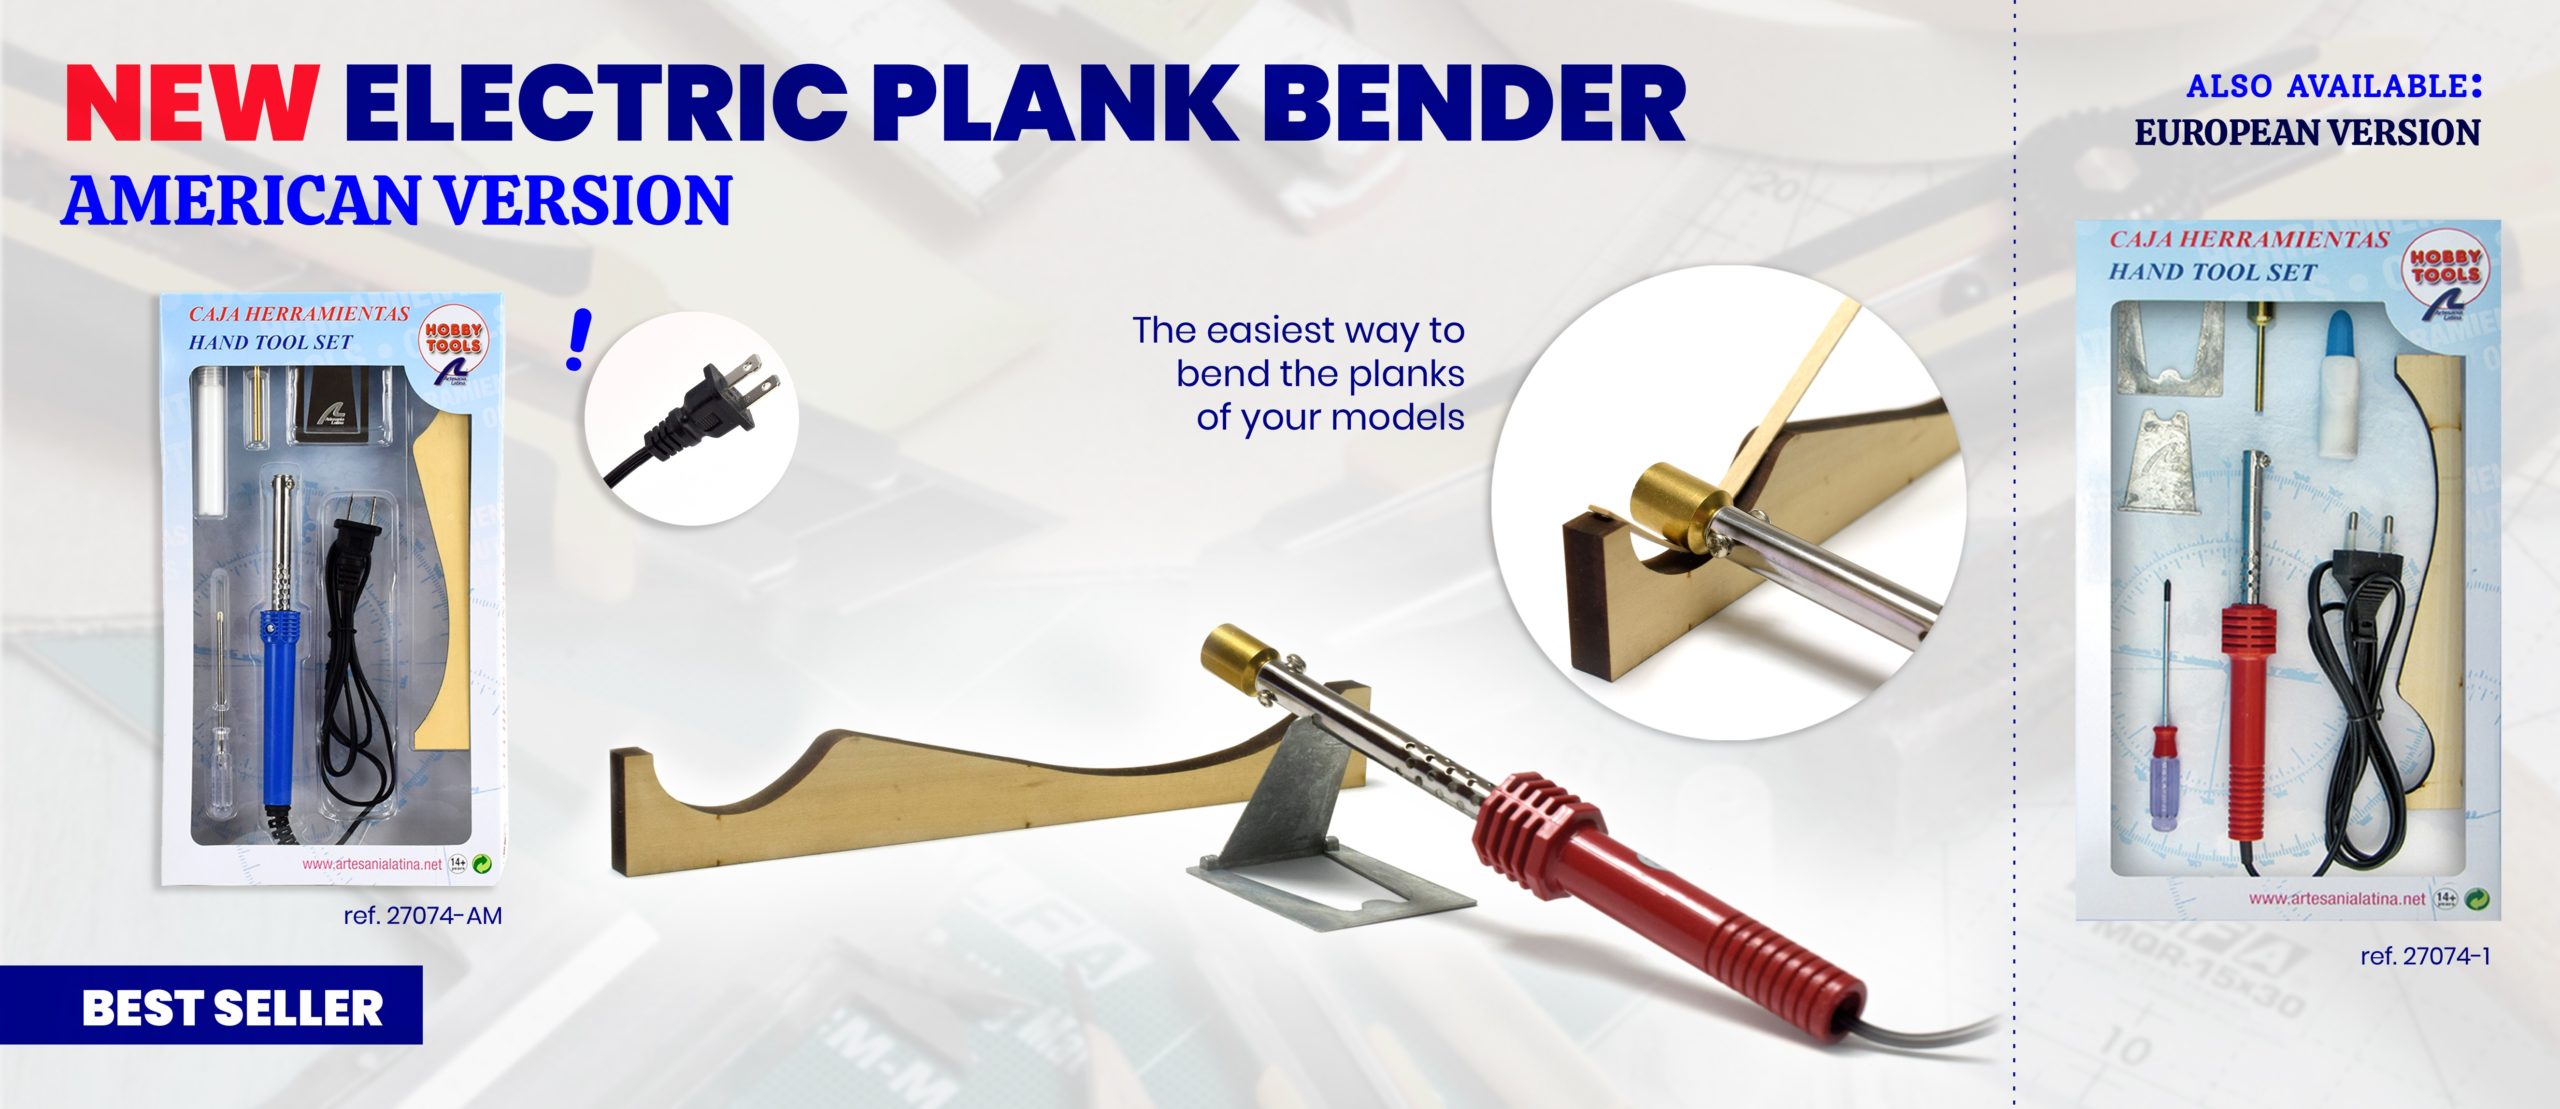 New 110-Volts American Version Electric Plank Bender for Model Building (27074-AM).